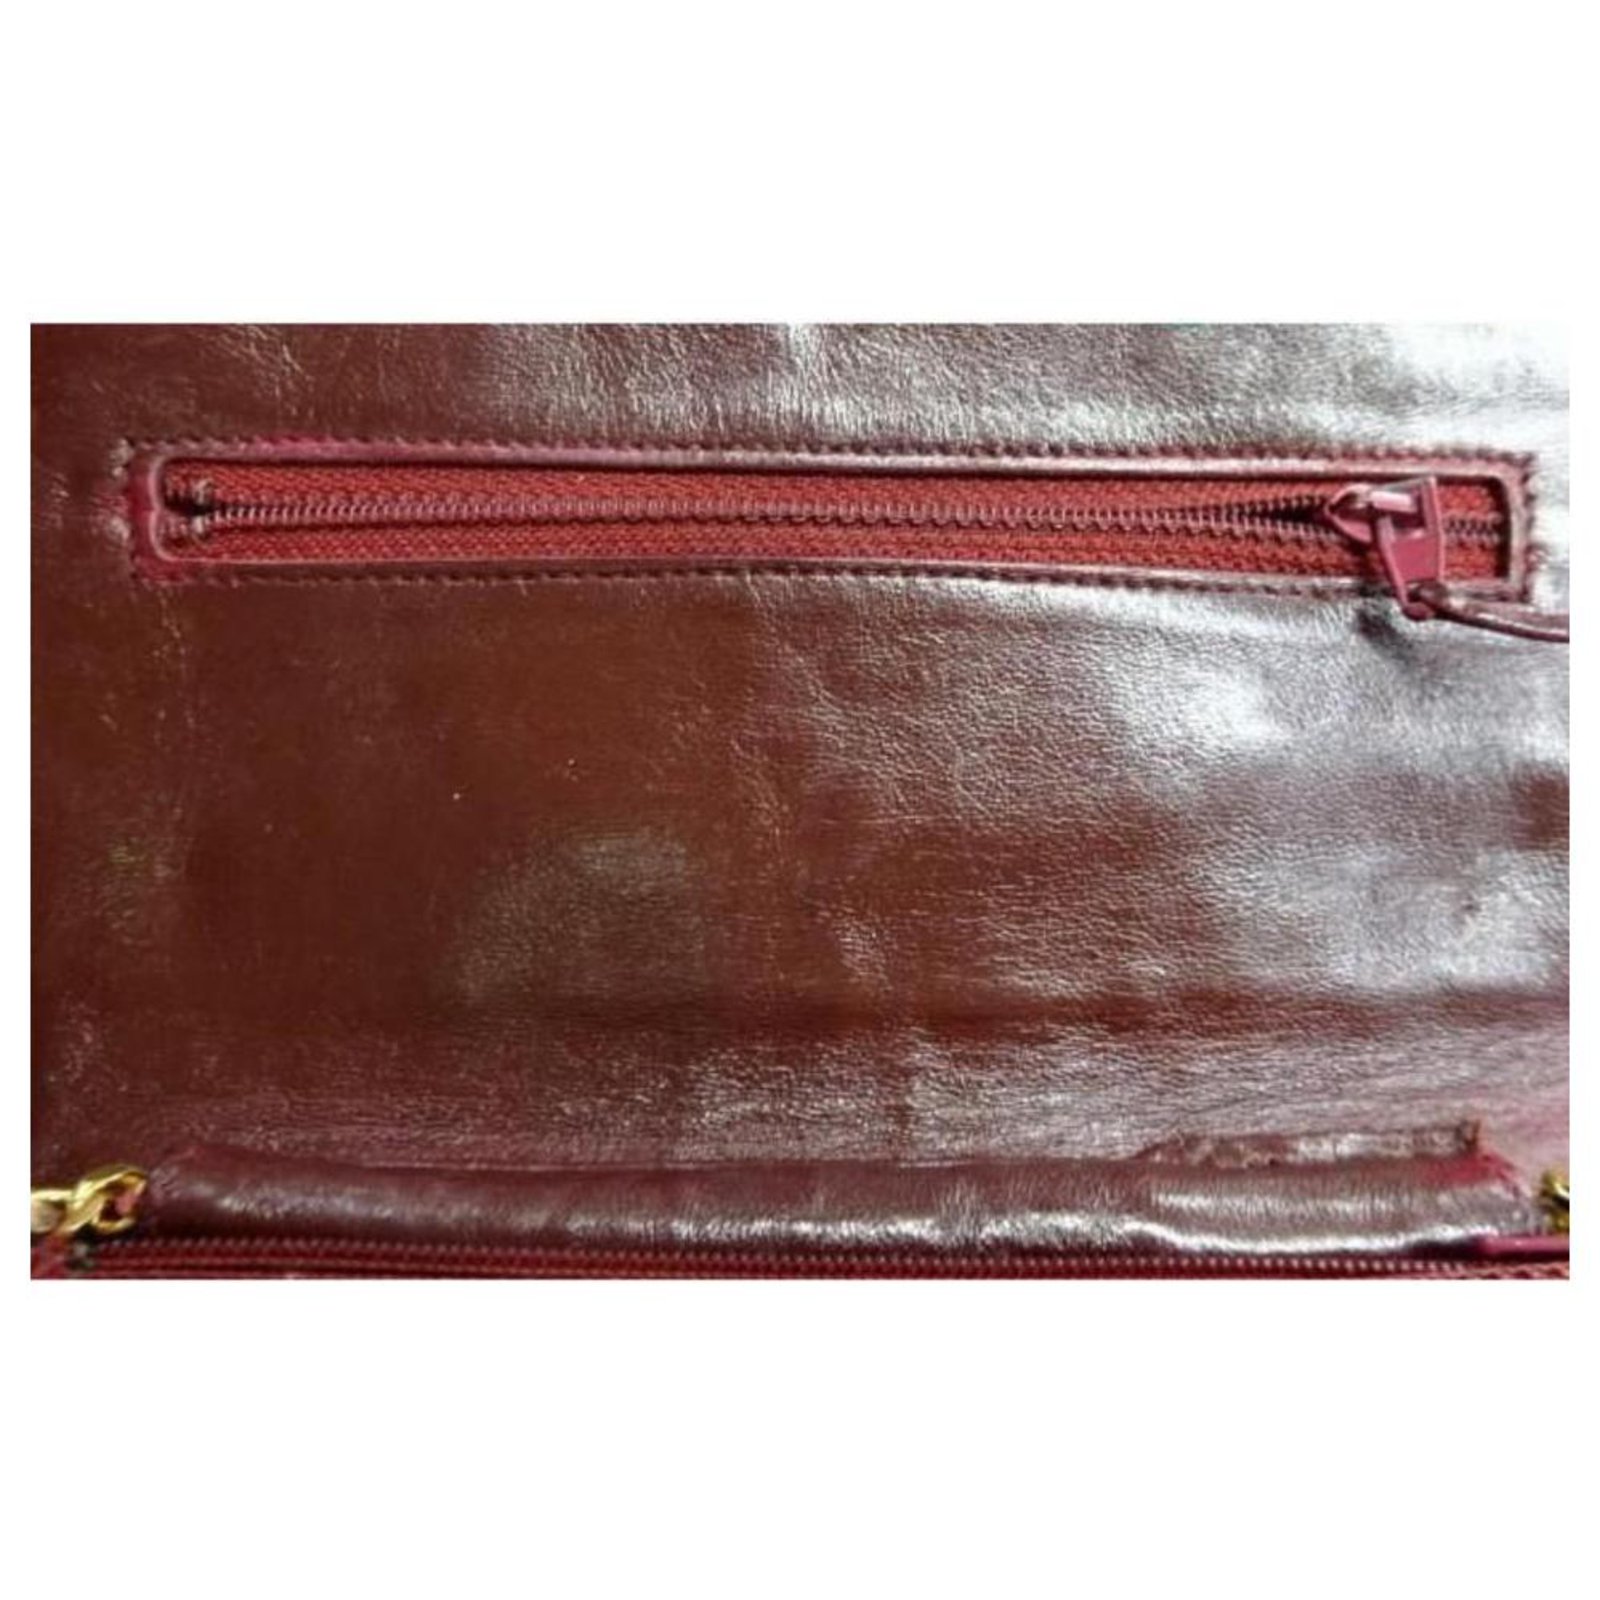 CHANEL Wallet on Chain Crossbody in Two Tone Bordeaux and Black